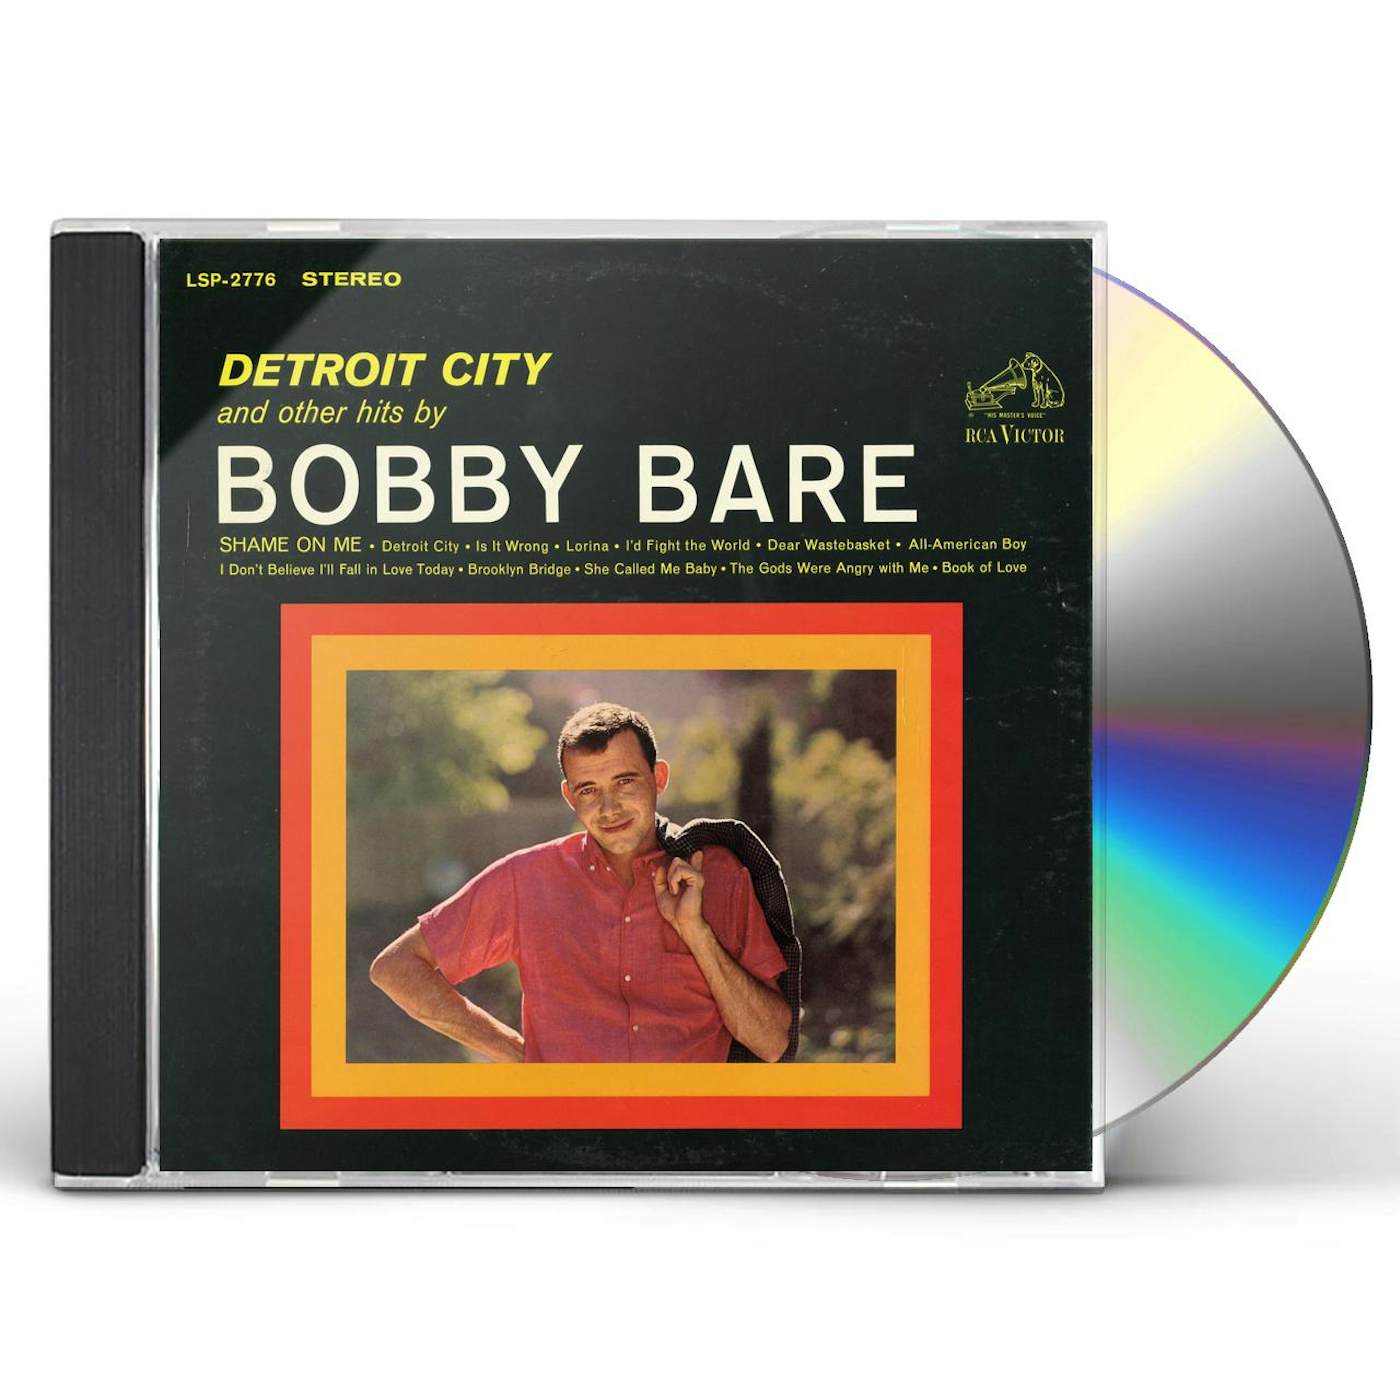 DETROIT CITY & OTHER HITS BY BOBBY BARE CD